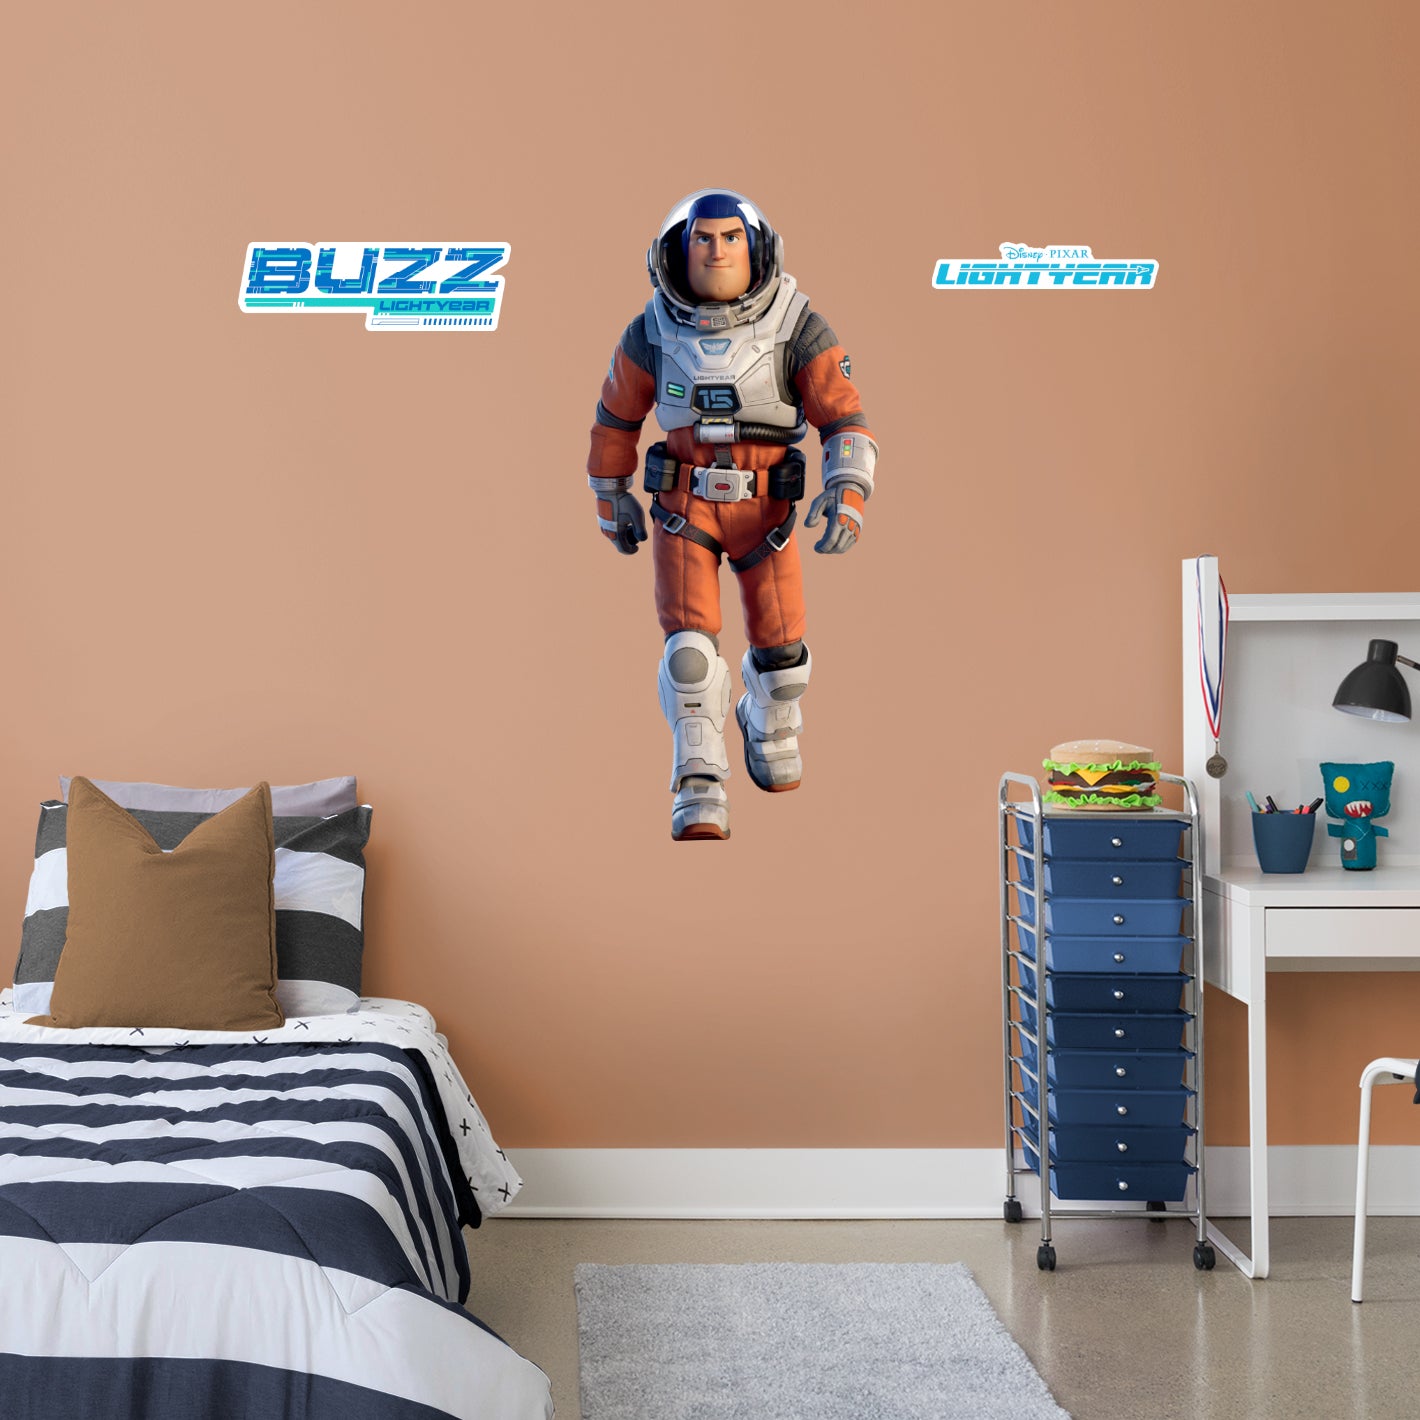 Lightyear: Buzz Lightyear XL-15 Suit RealBig - Officially Licensed Disney Removable Adhesive Decal